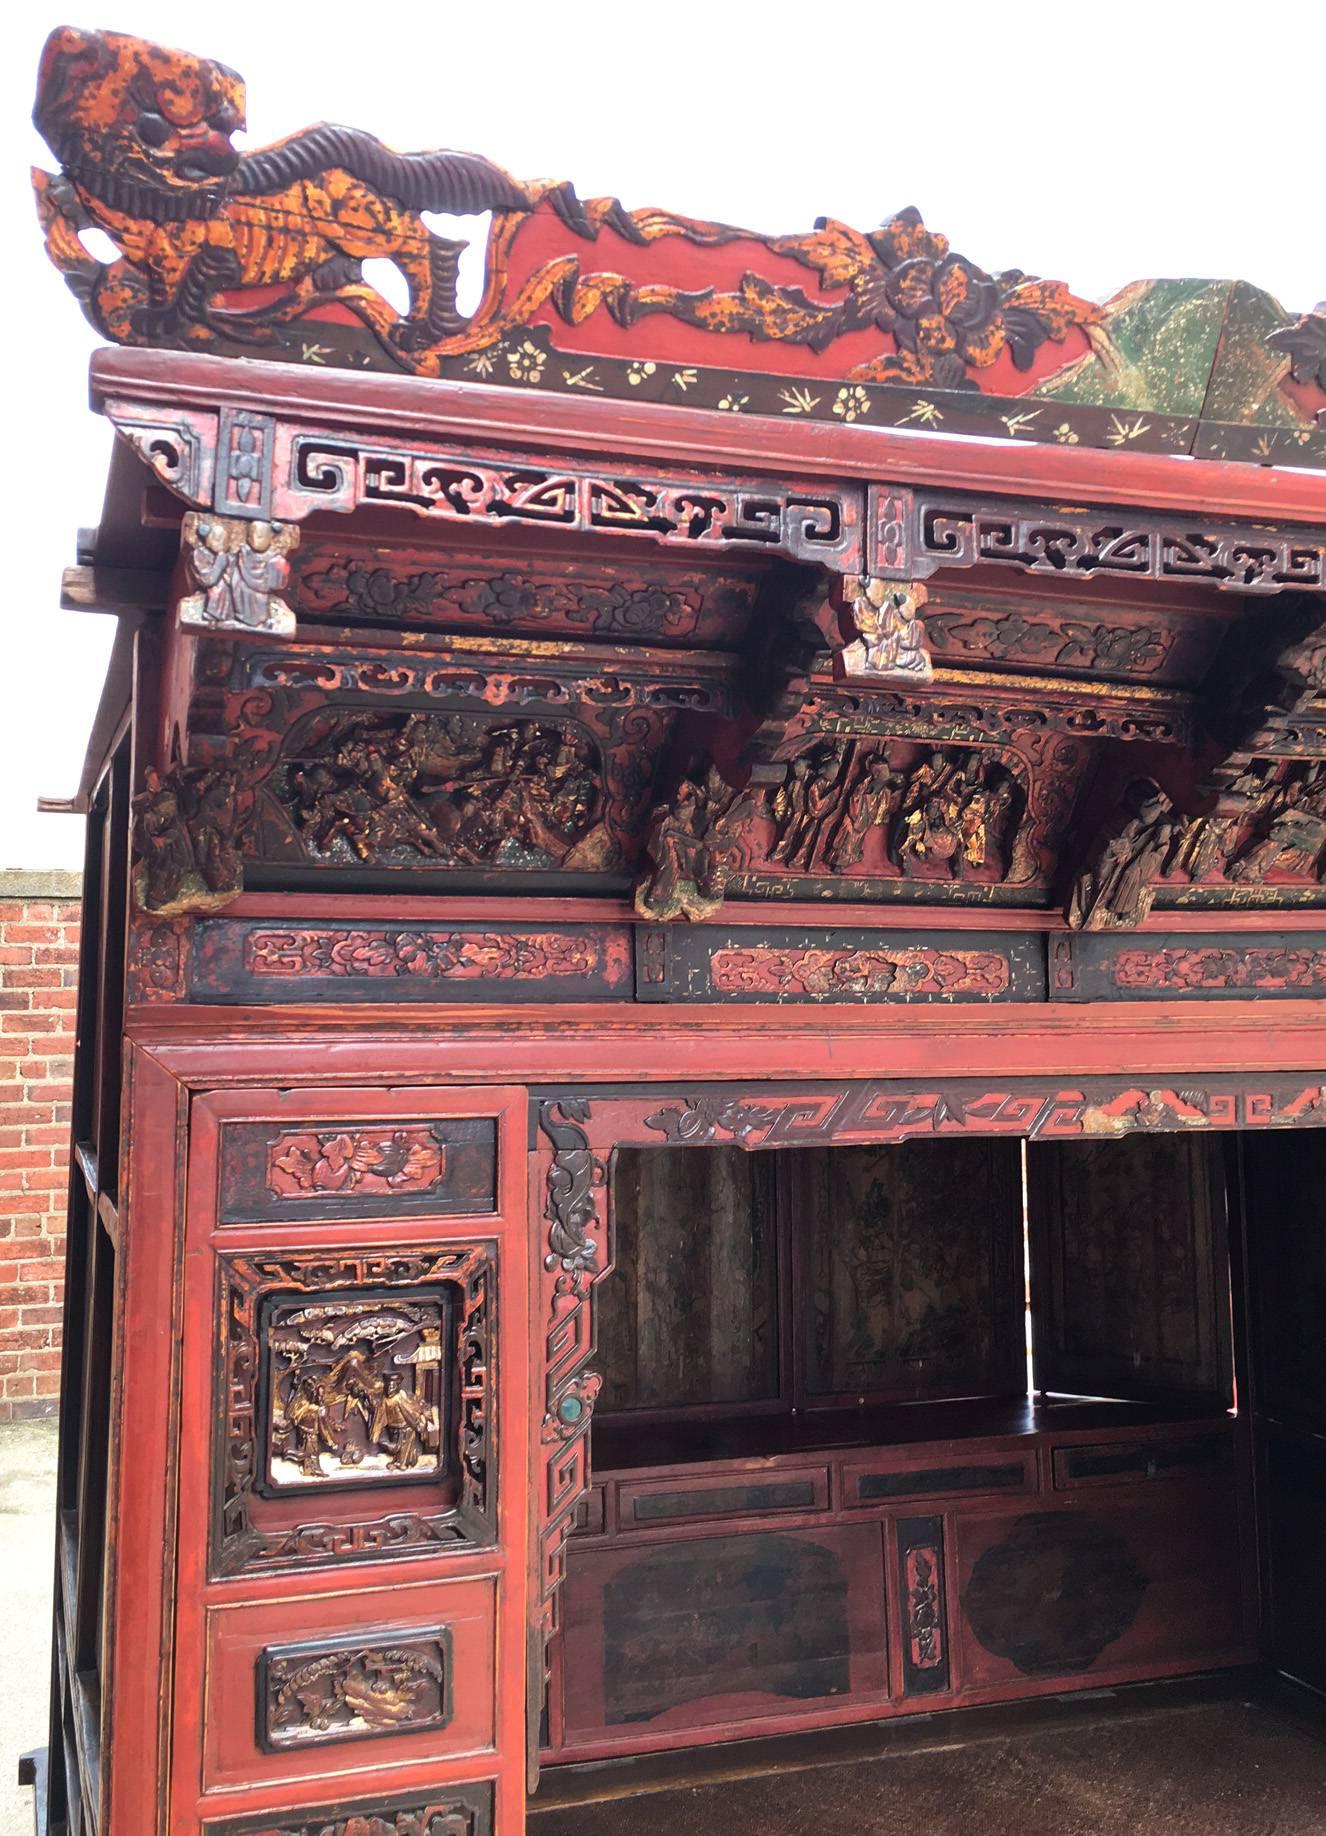 Opt for drama with this late 19th century Chinese opium canopy bed, crafted of elmwood. The exterior is heavily decorated with gold leafing, carvings, ornate carved figurine pillars, and delicate fretwork. The interior features eight, hand painted,